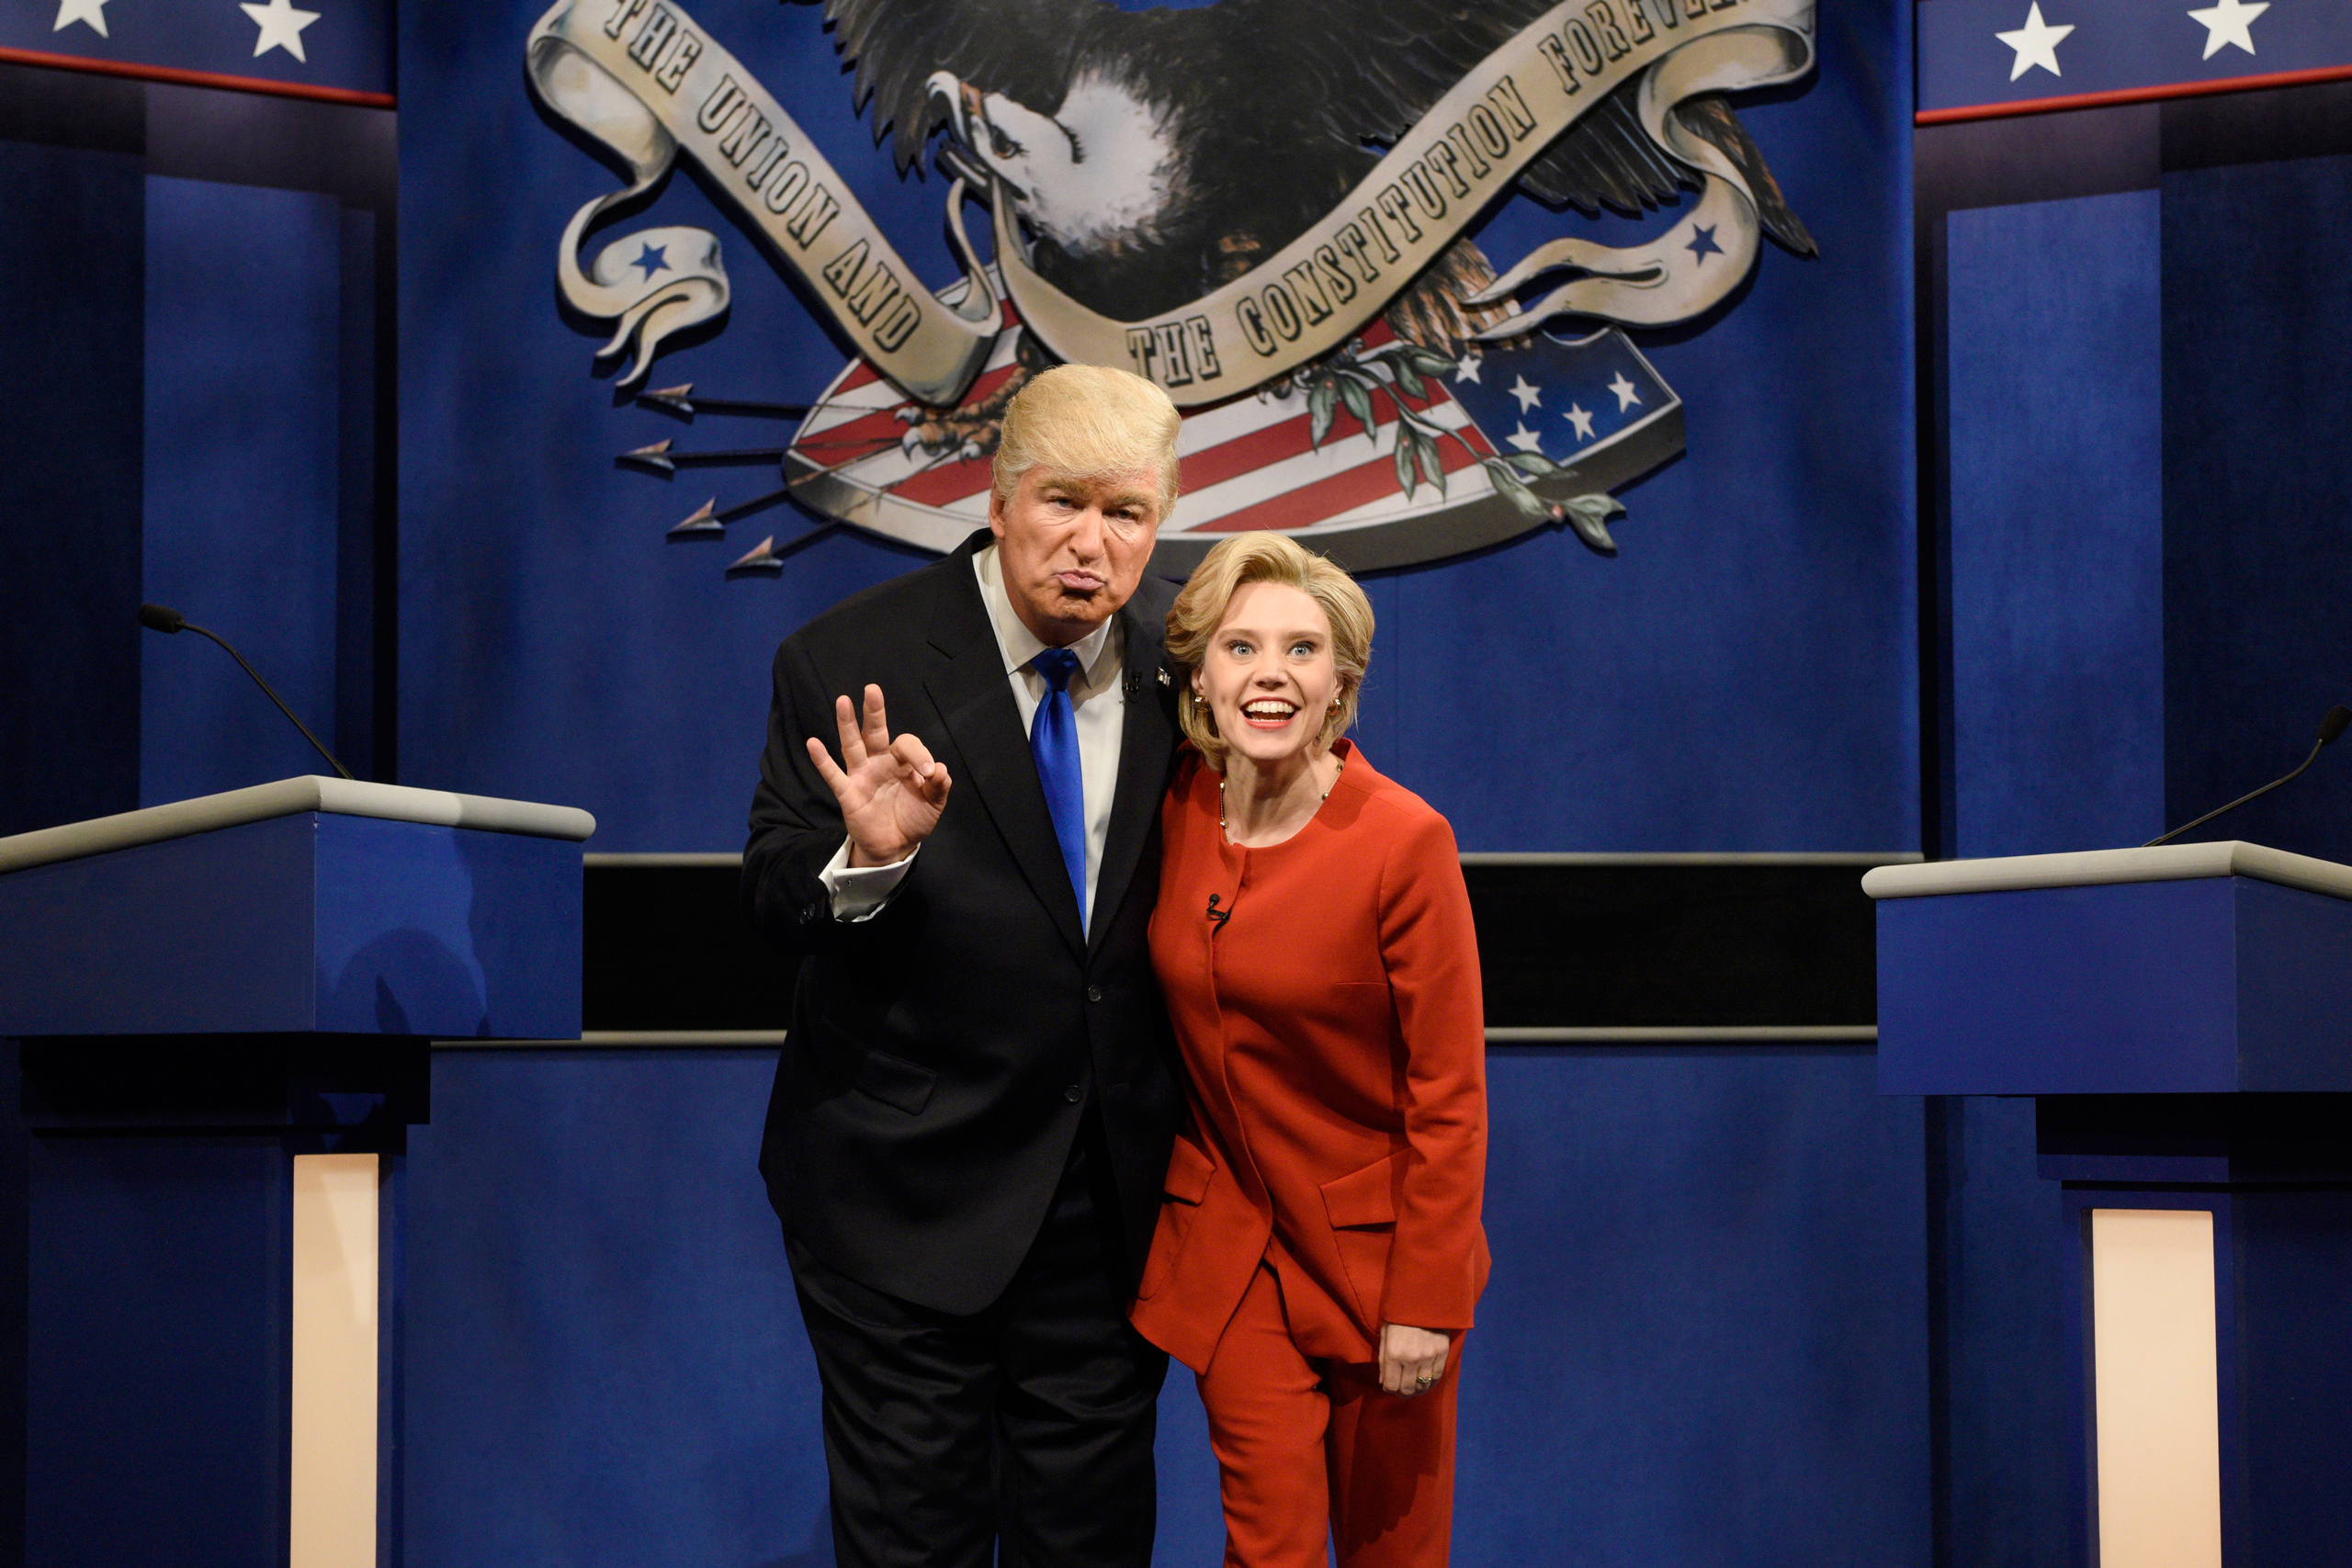 Alec Baldwin as Donald Trump and Kate McKinnon as Hillary Clinton during the "Debate Cold Open" sketch on October 1, 2016. (Will Heath—NBCU Photo Bank/Getty Images)